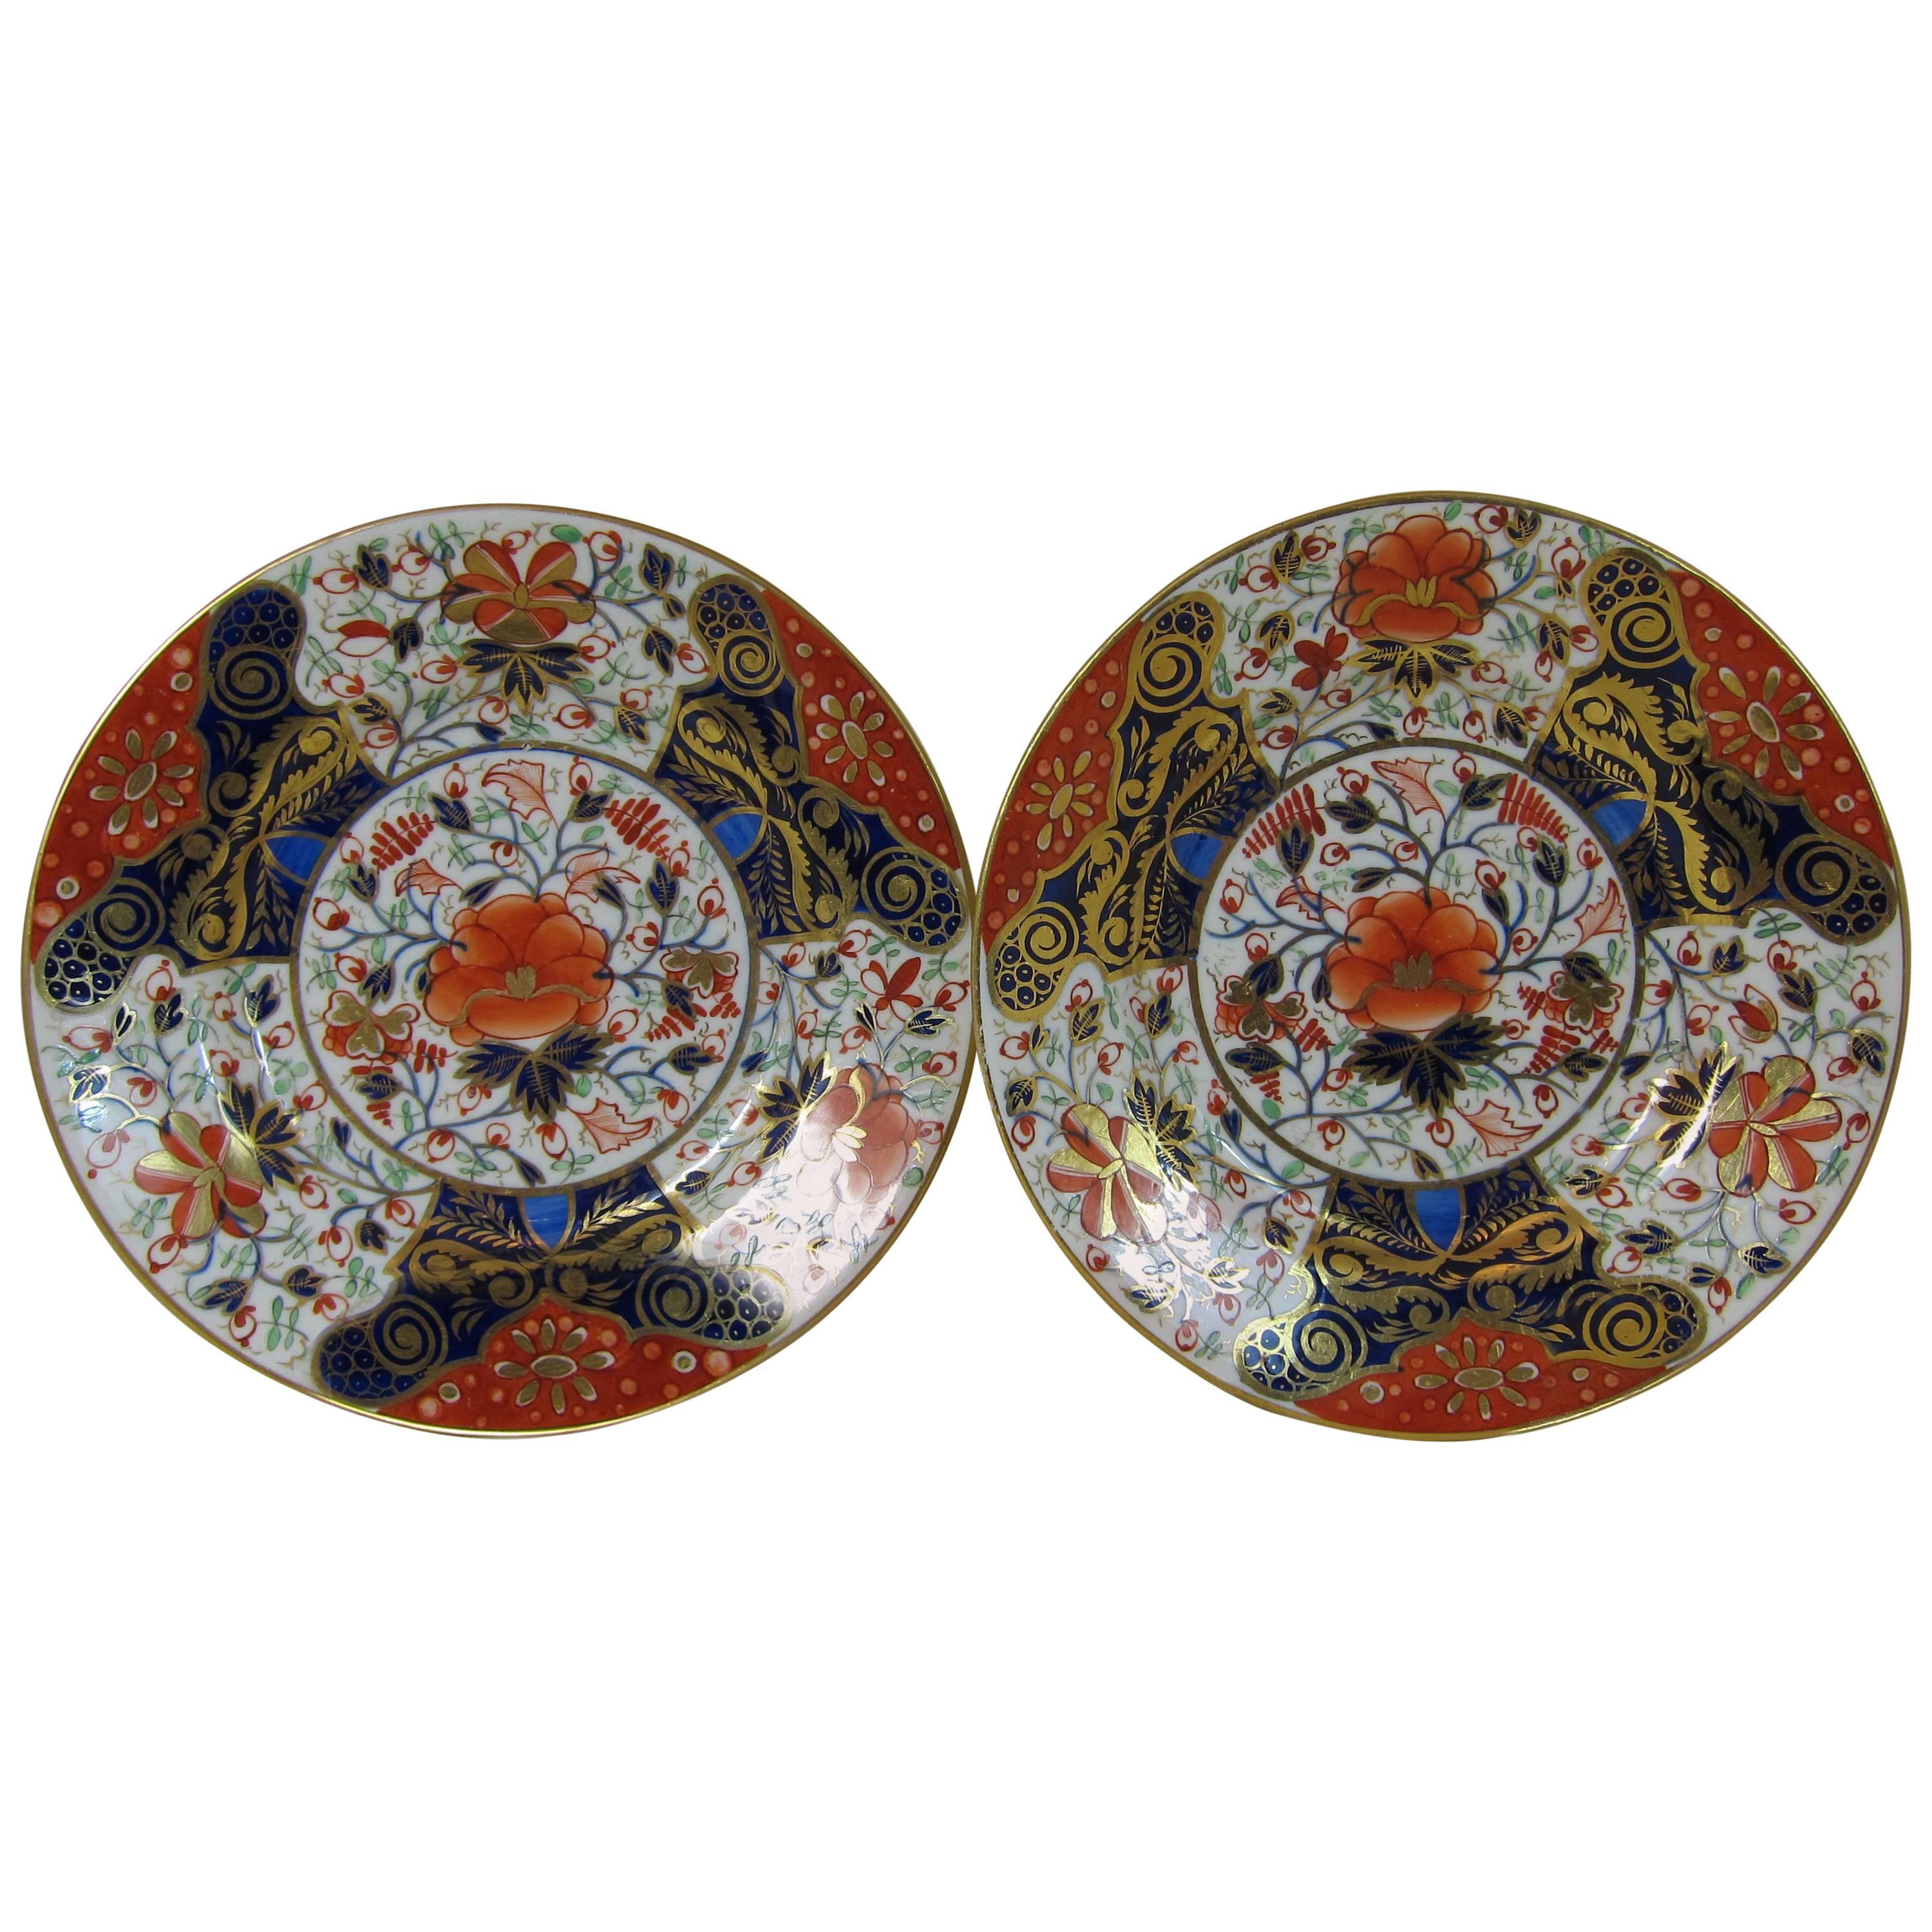 19th Century Derby Porcelain Imari Plates in an unusual size